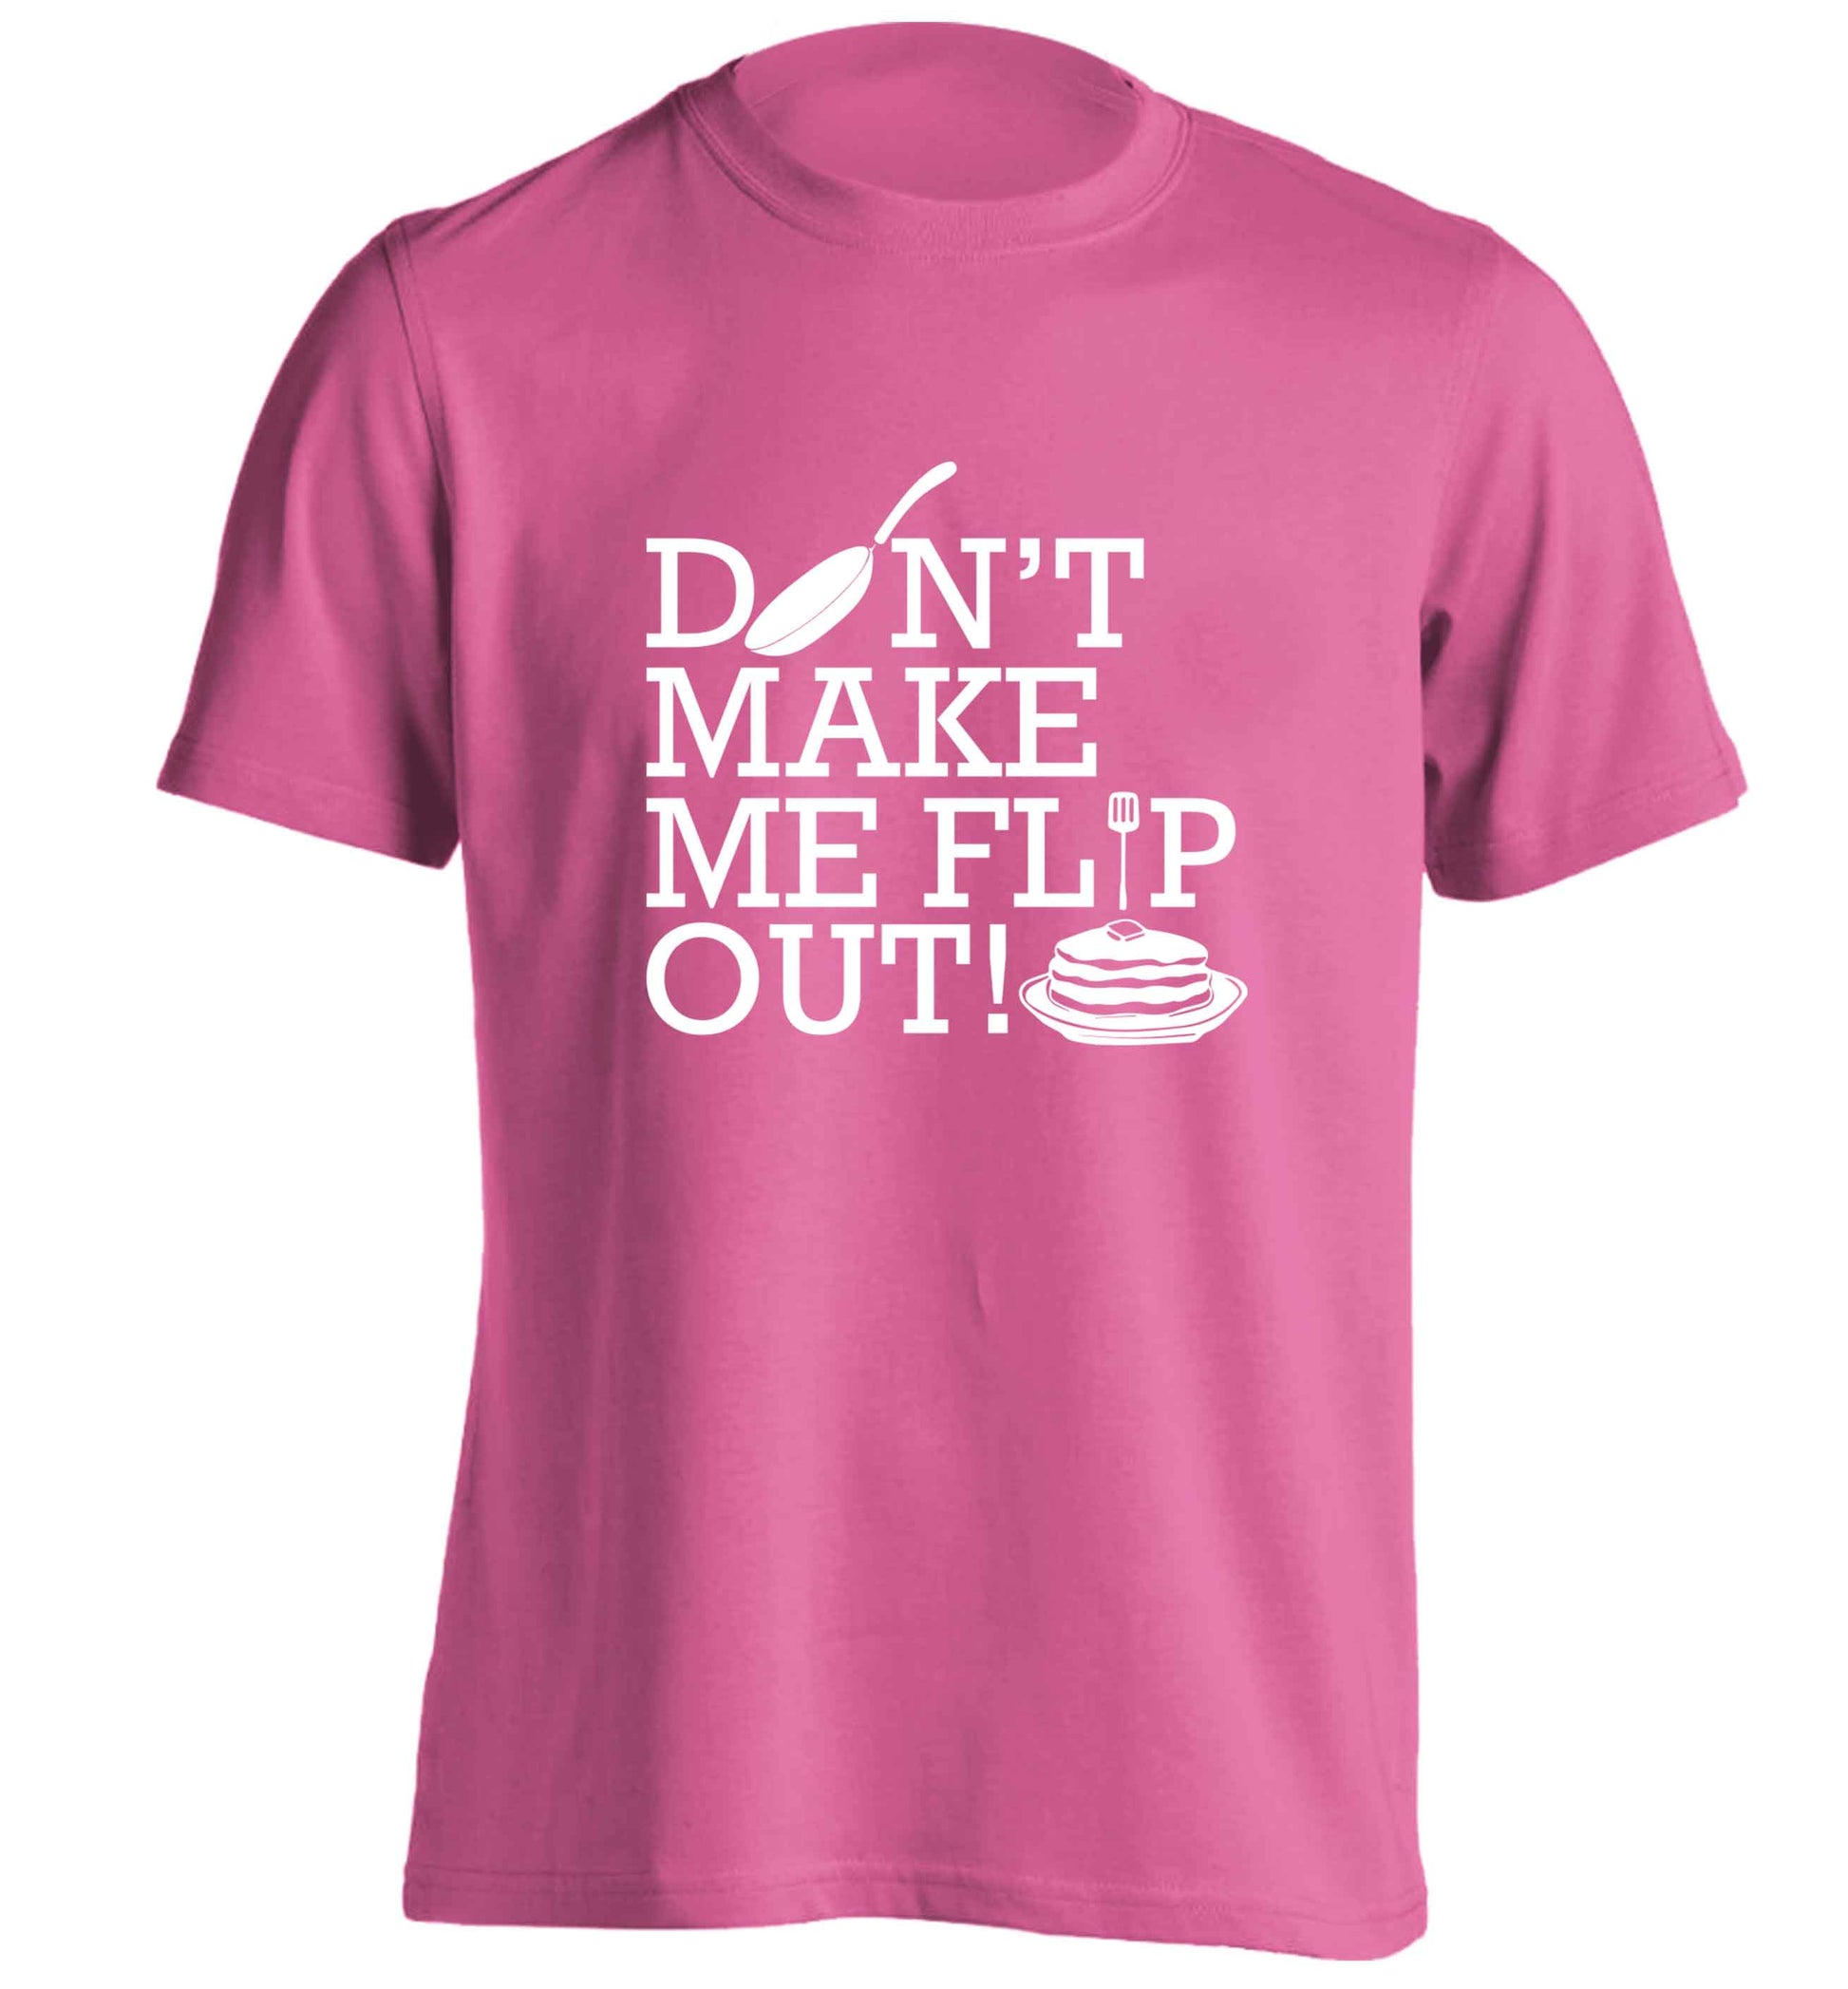 Don't make me flip out adults unisex pink Tshirt 2XL